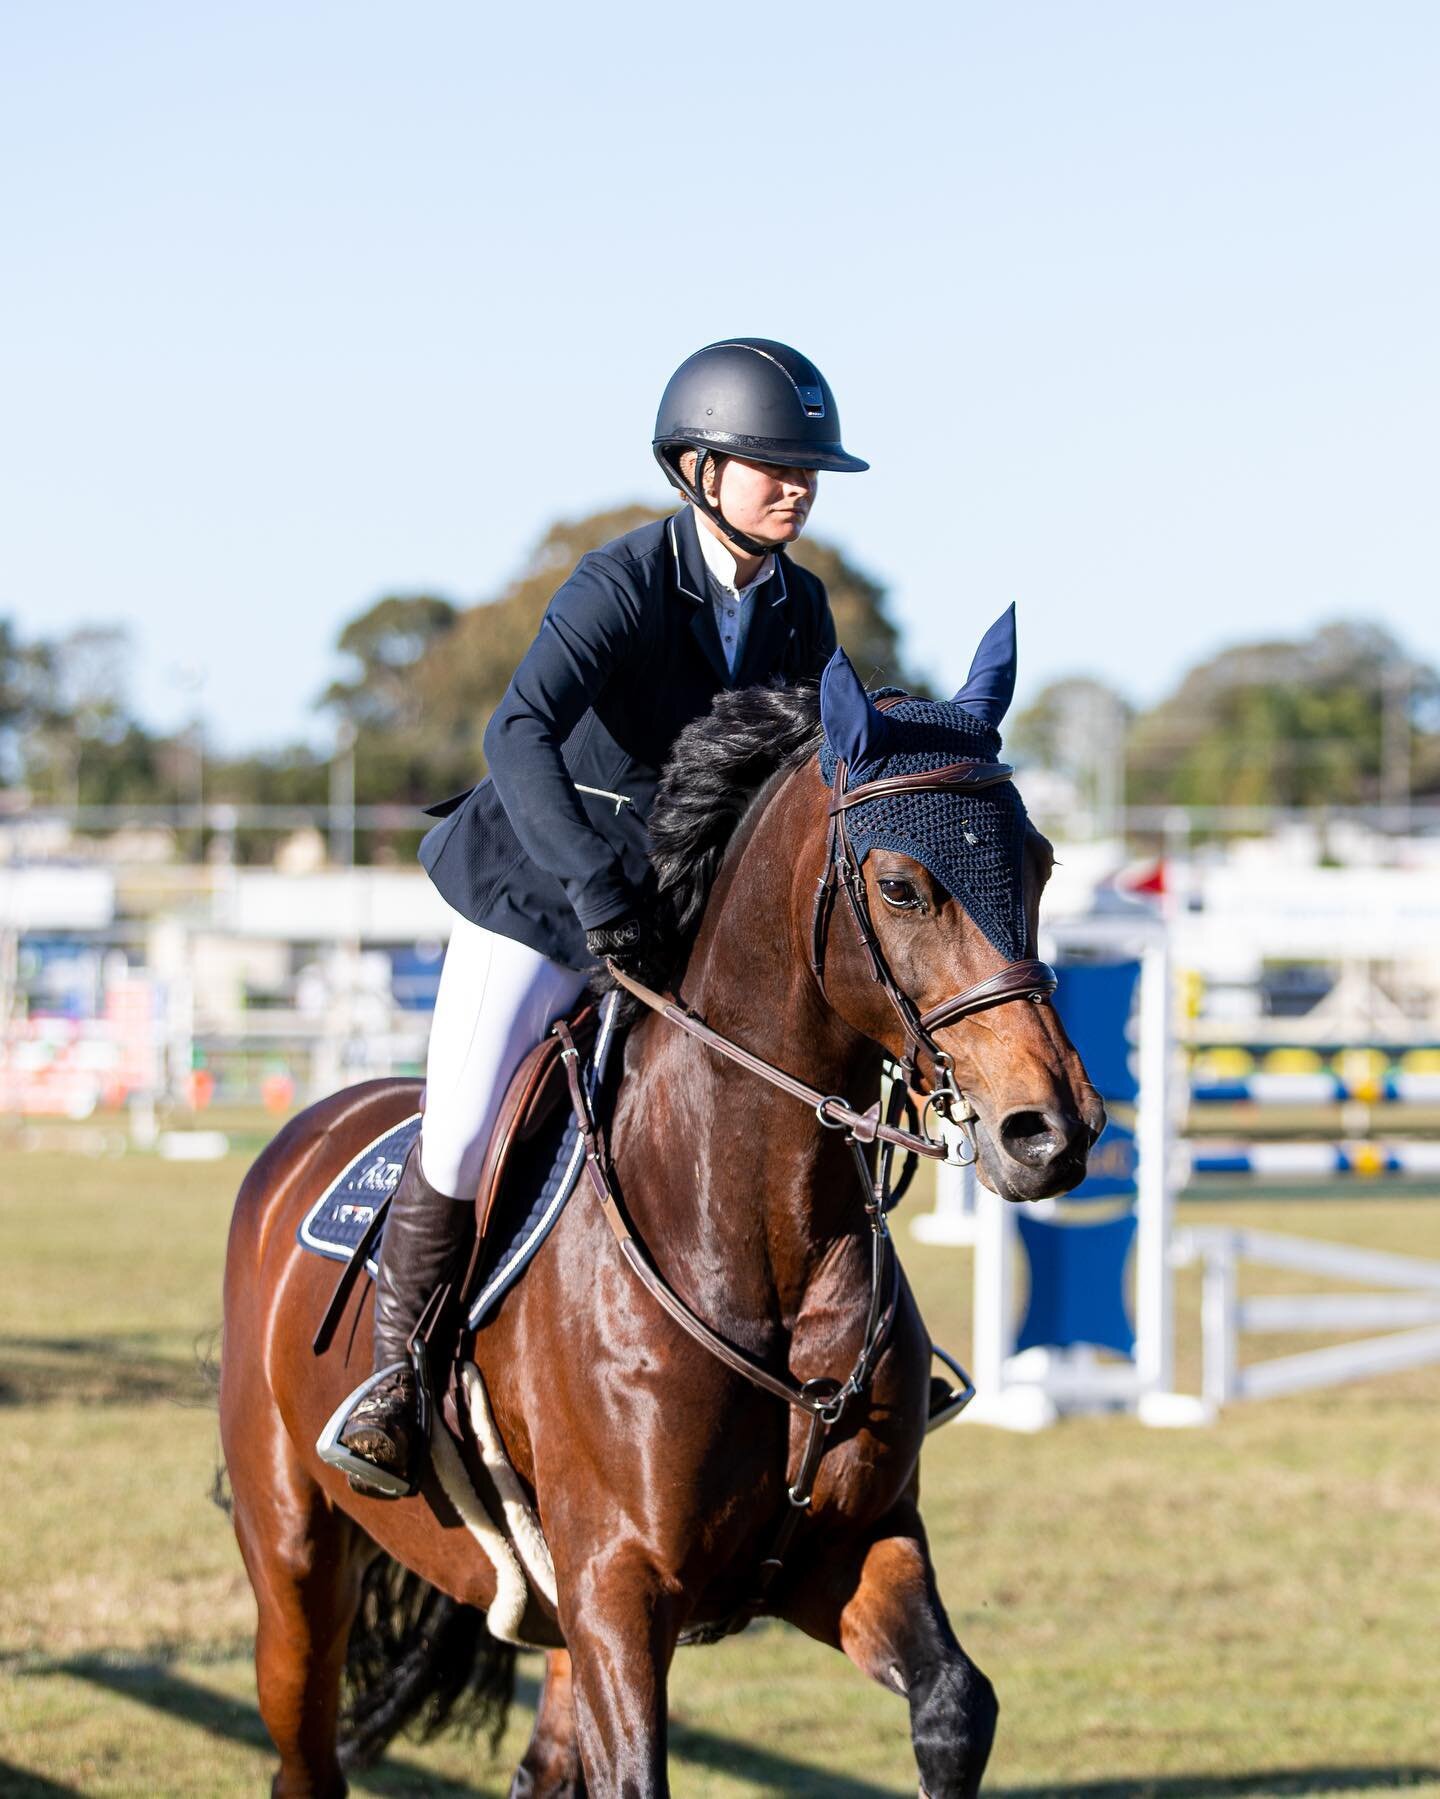 Flashback Friday - Holly Douglas&rsquo;s Kissing The Sky cantering around a classy as usual round at the Darling Downs Easter Show Jumping Championships earlier this year! #RangeviewRider

📸 @thejtaime